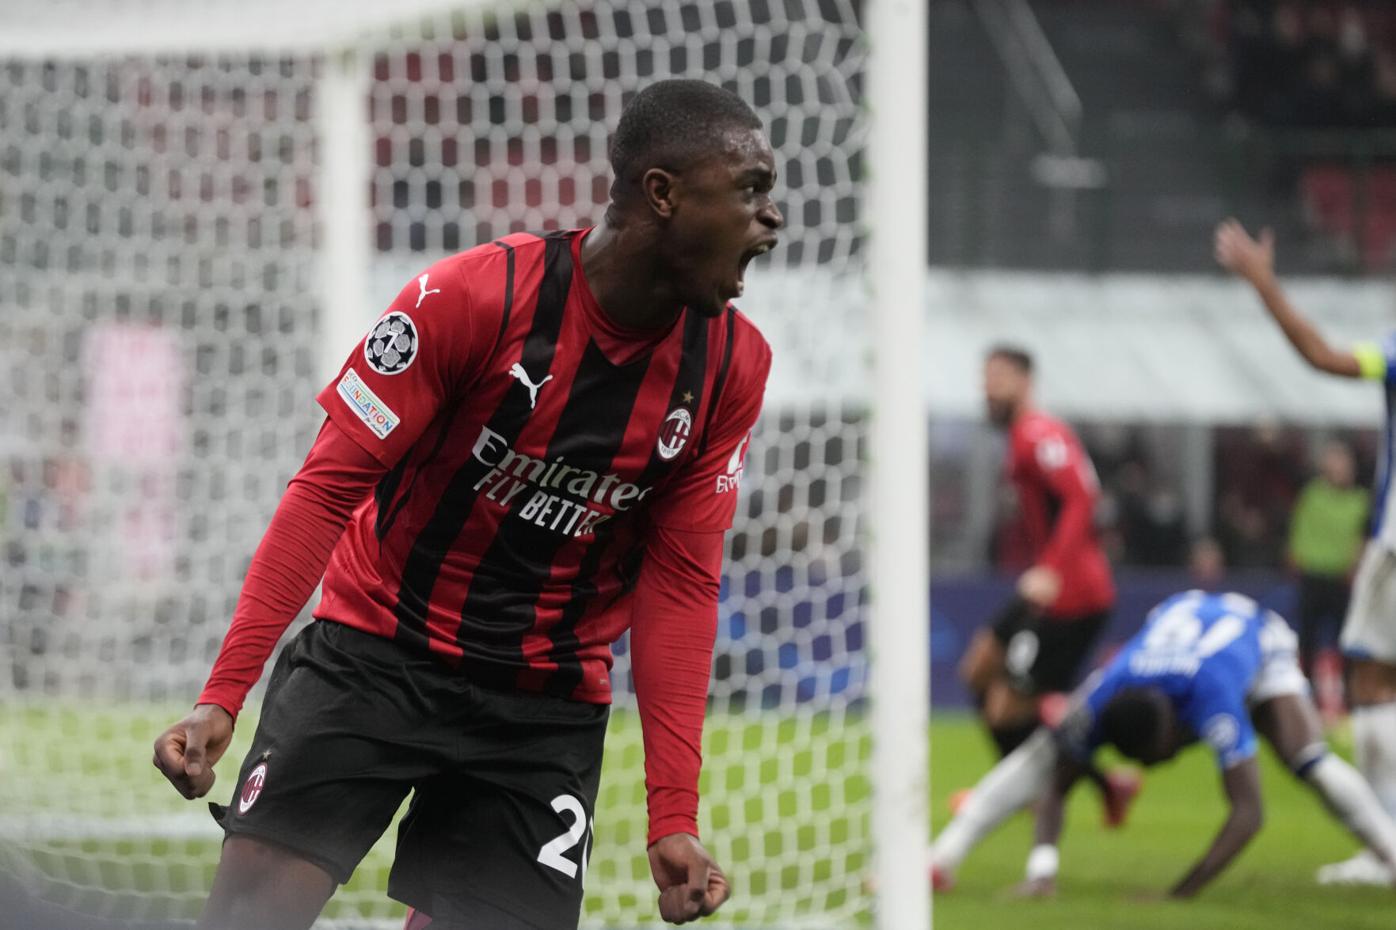 Milan draws 1-1 against Porto to keep faint CL hopes alive